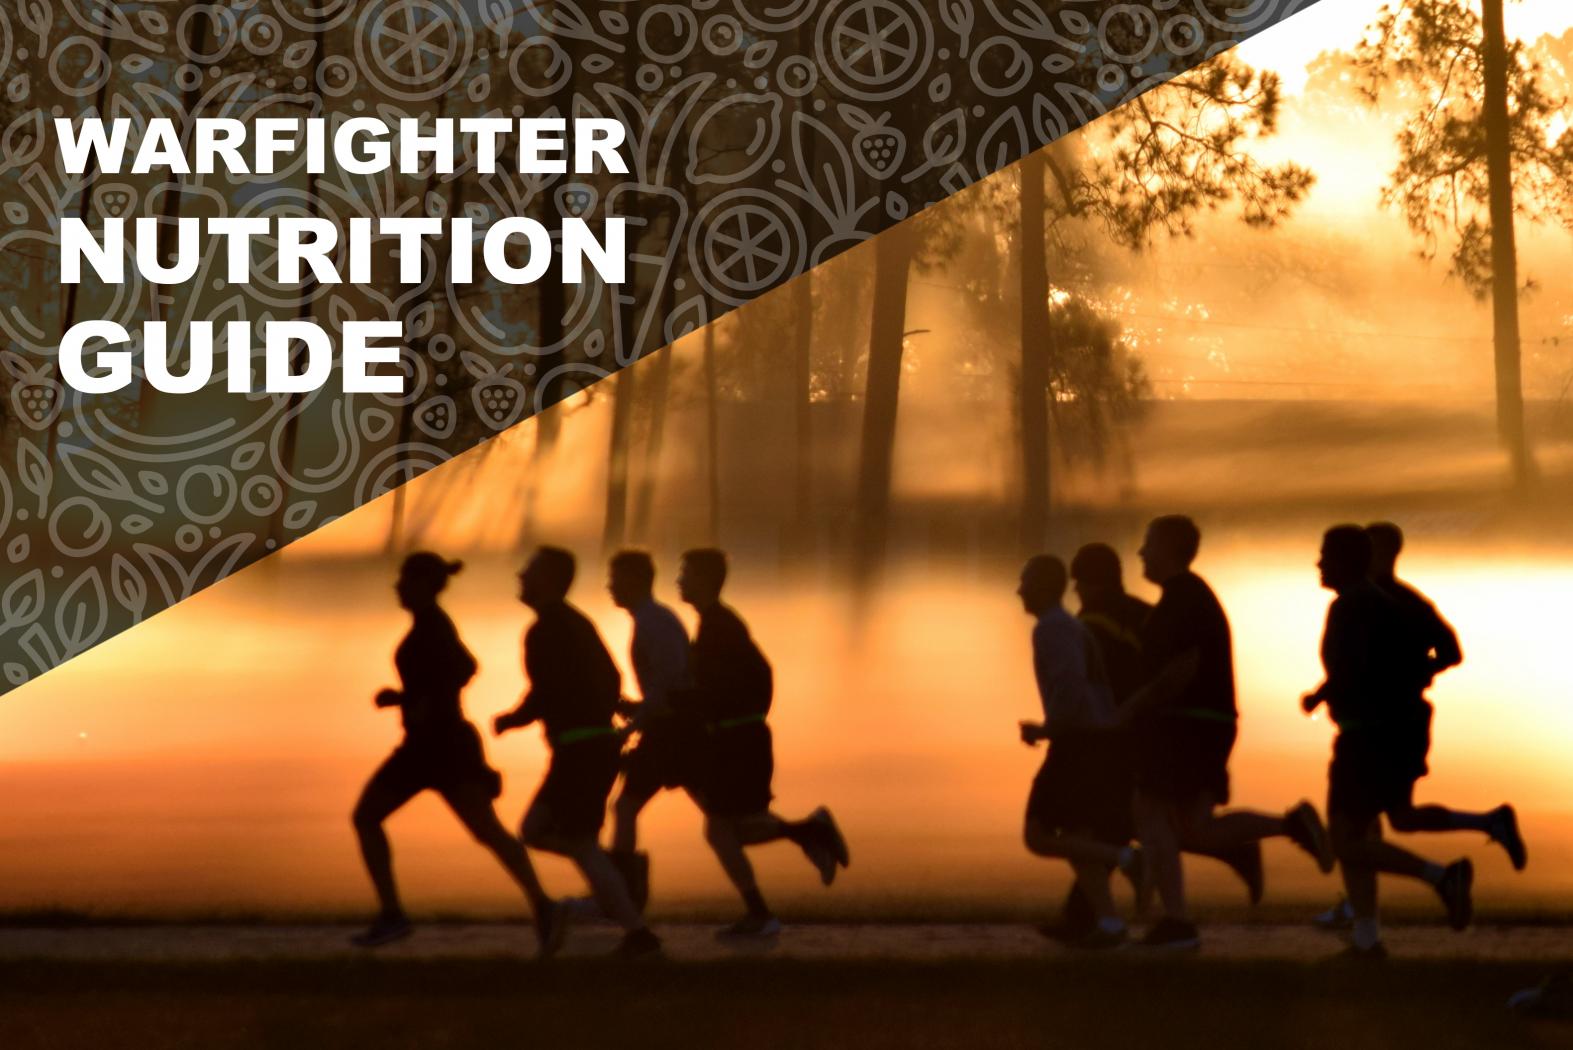 HPRC Warfighter Nutrition Guide. Chapter 8. Silhouette of people running for fitness training at sunrise.